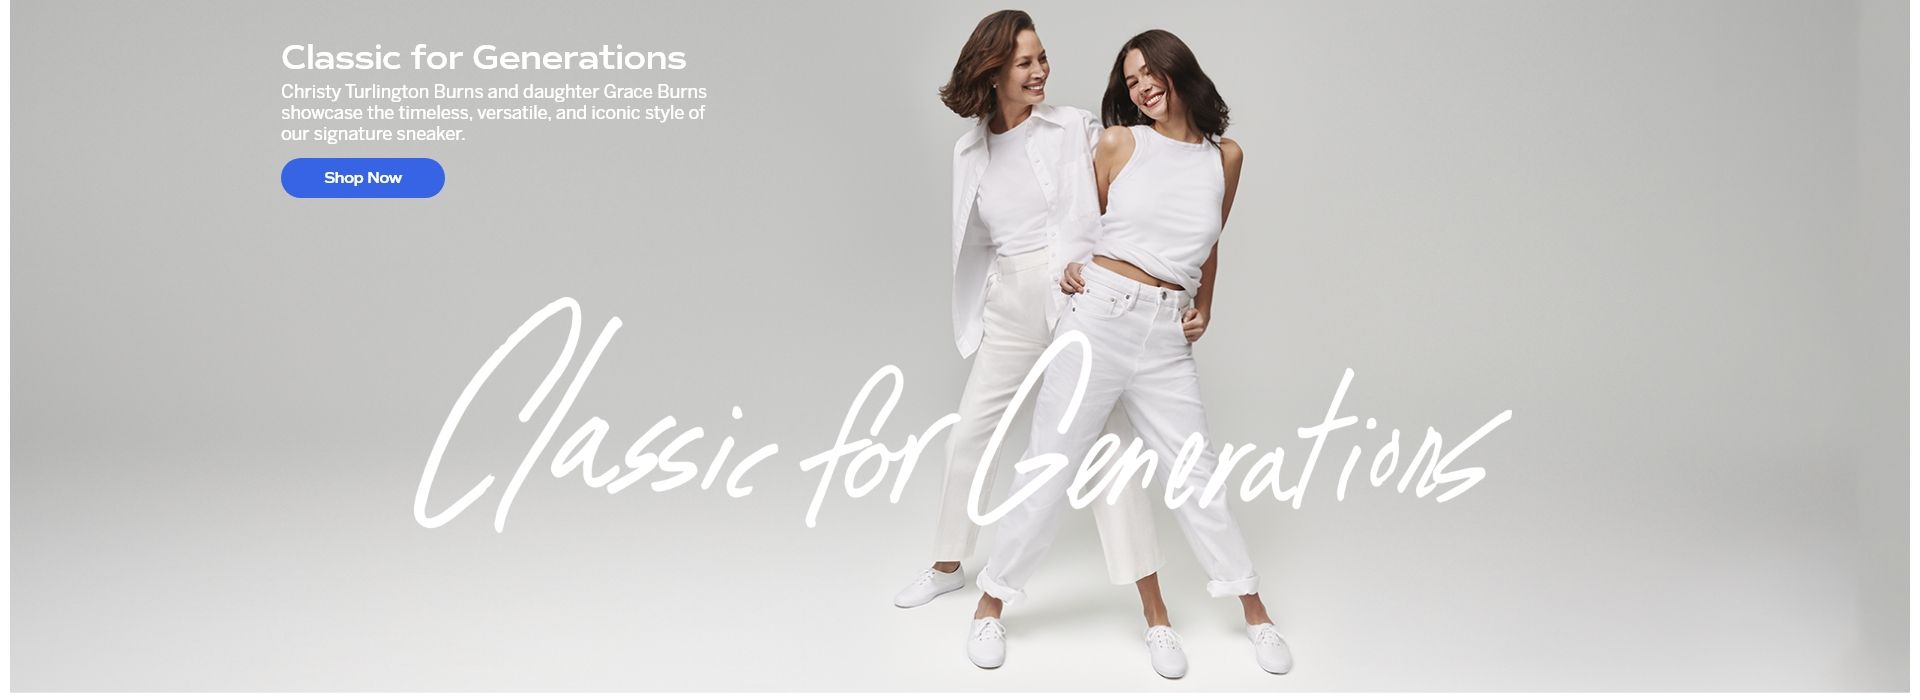 Classic for Generations. Christy Turlington Burns and daughter Grace Burns showcase the timeless, versatile, and iconic style of our signature sneaker. Shop Now